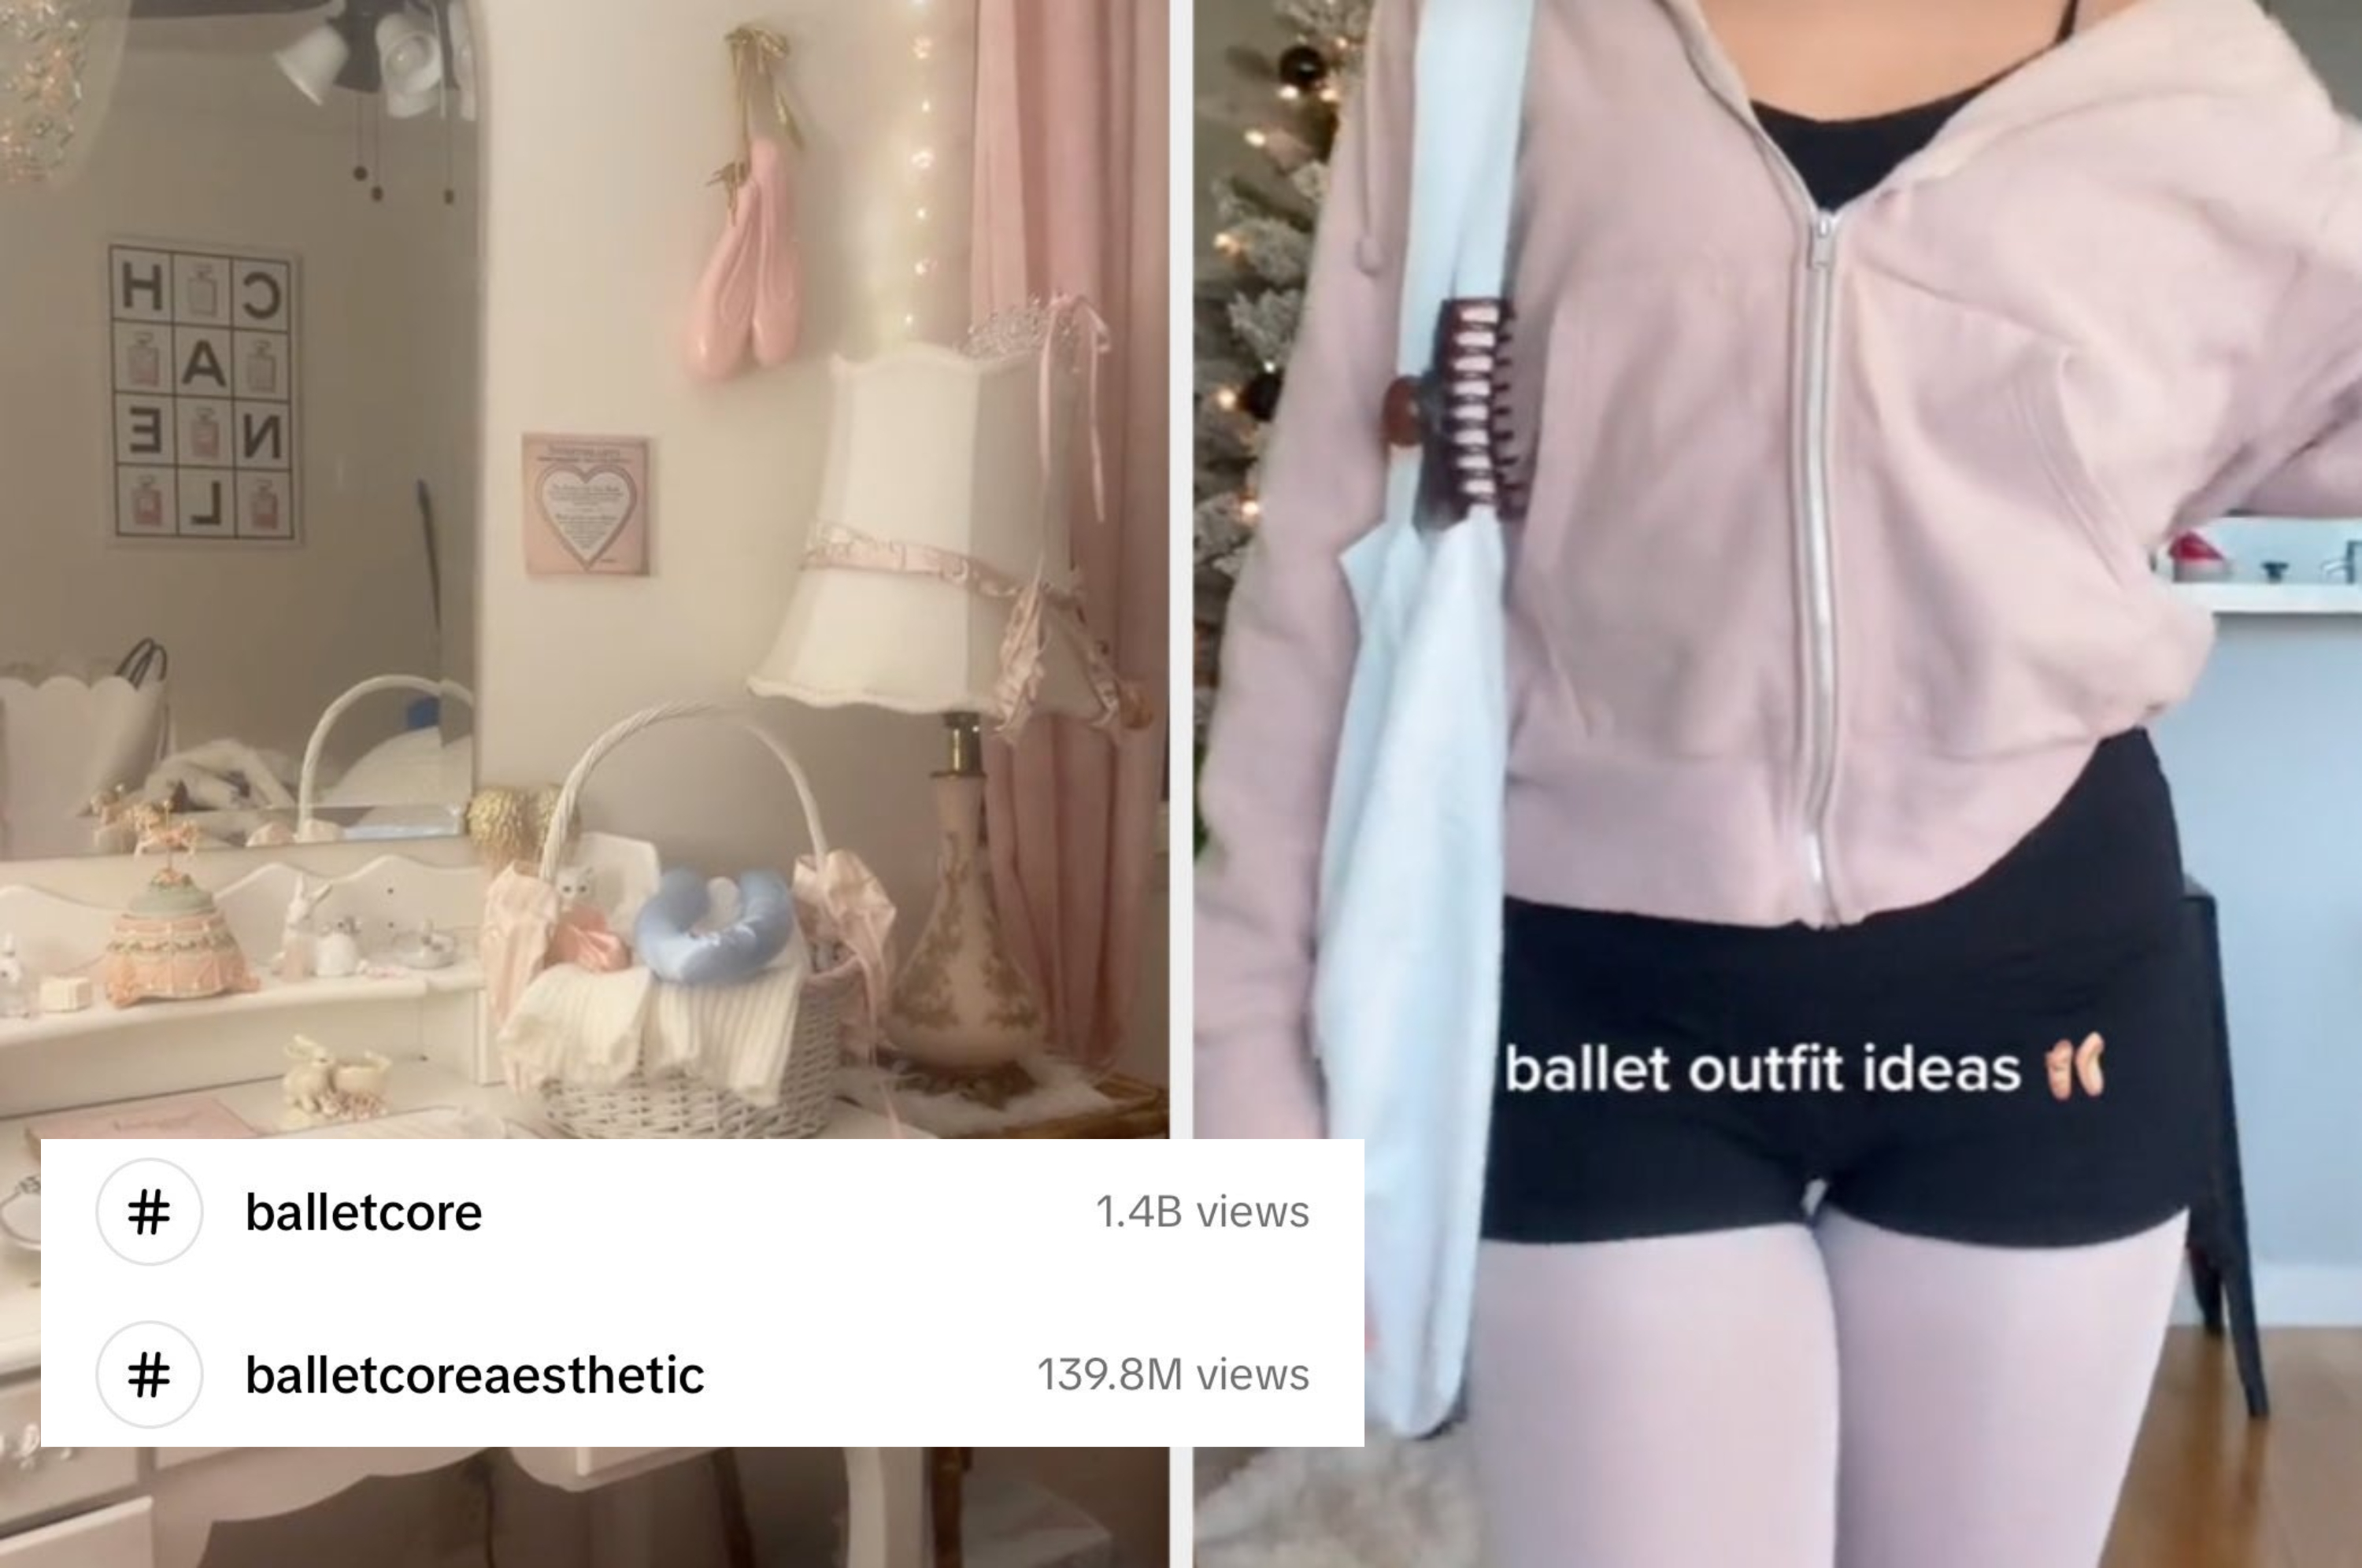 pink themed vanity in a bedroom and someone dressed in a ballet outfit